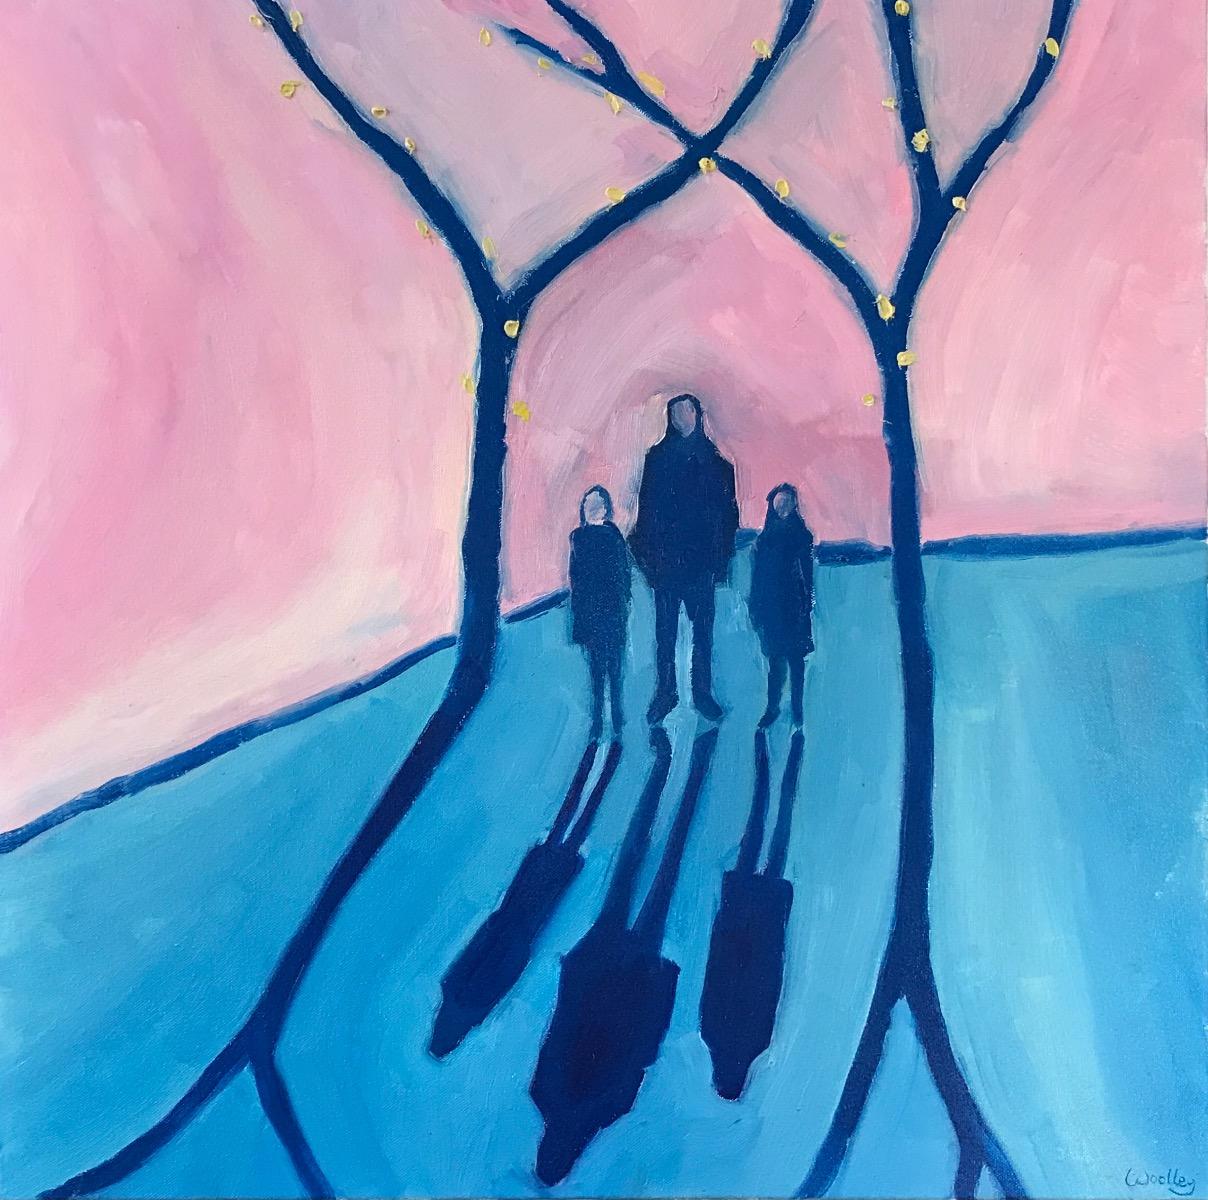 Cotswolds sunset 2, Original painting, Figurative art, People, Shadows  - Painting by Eleanor Woolley